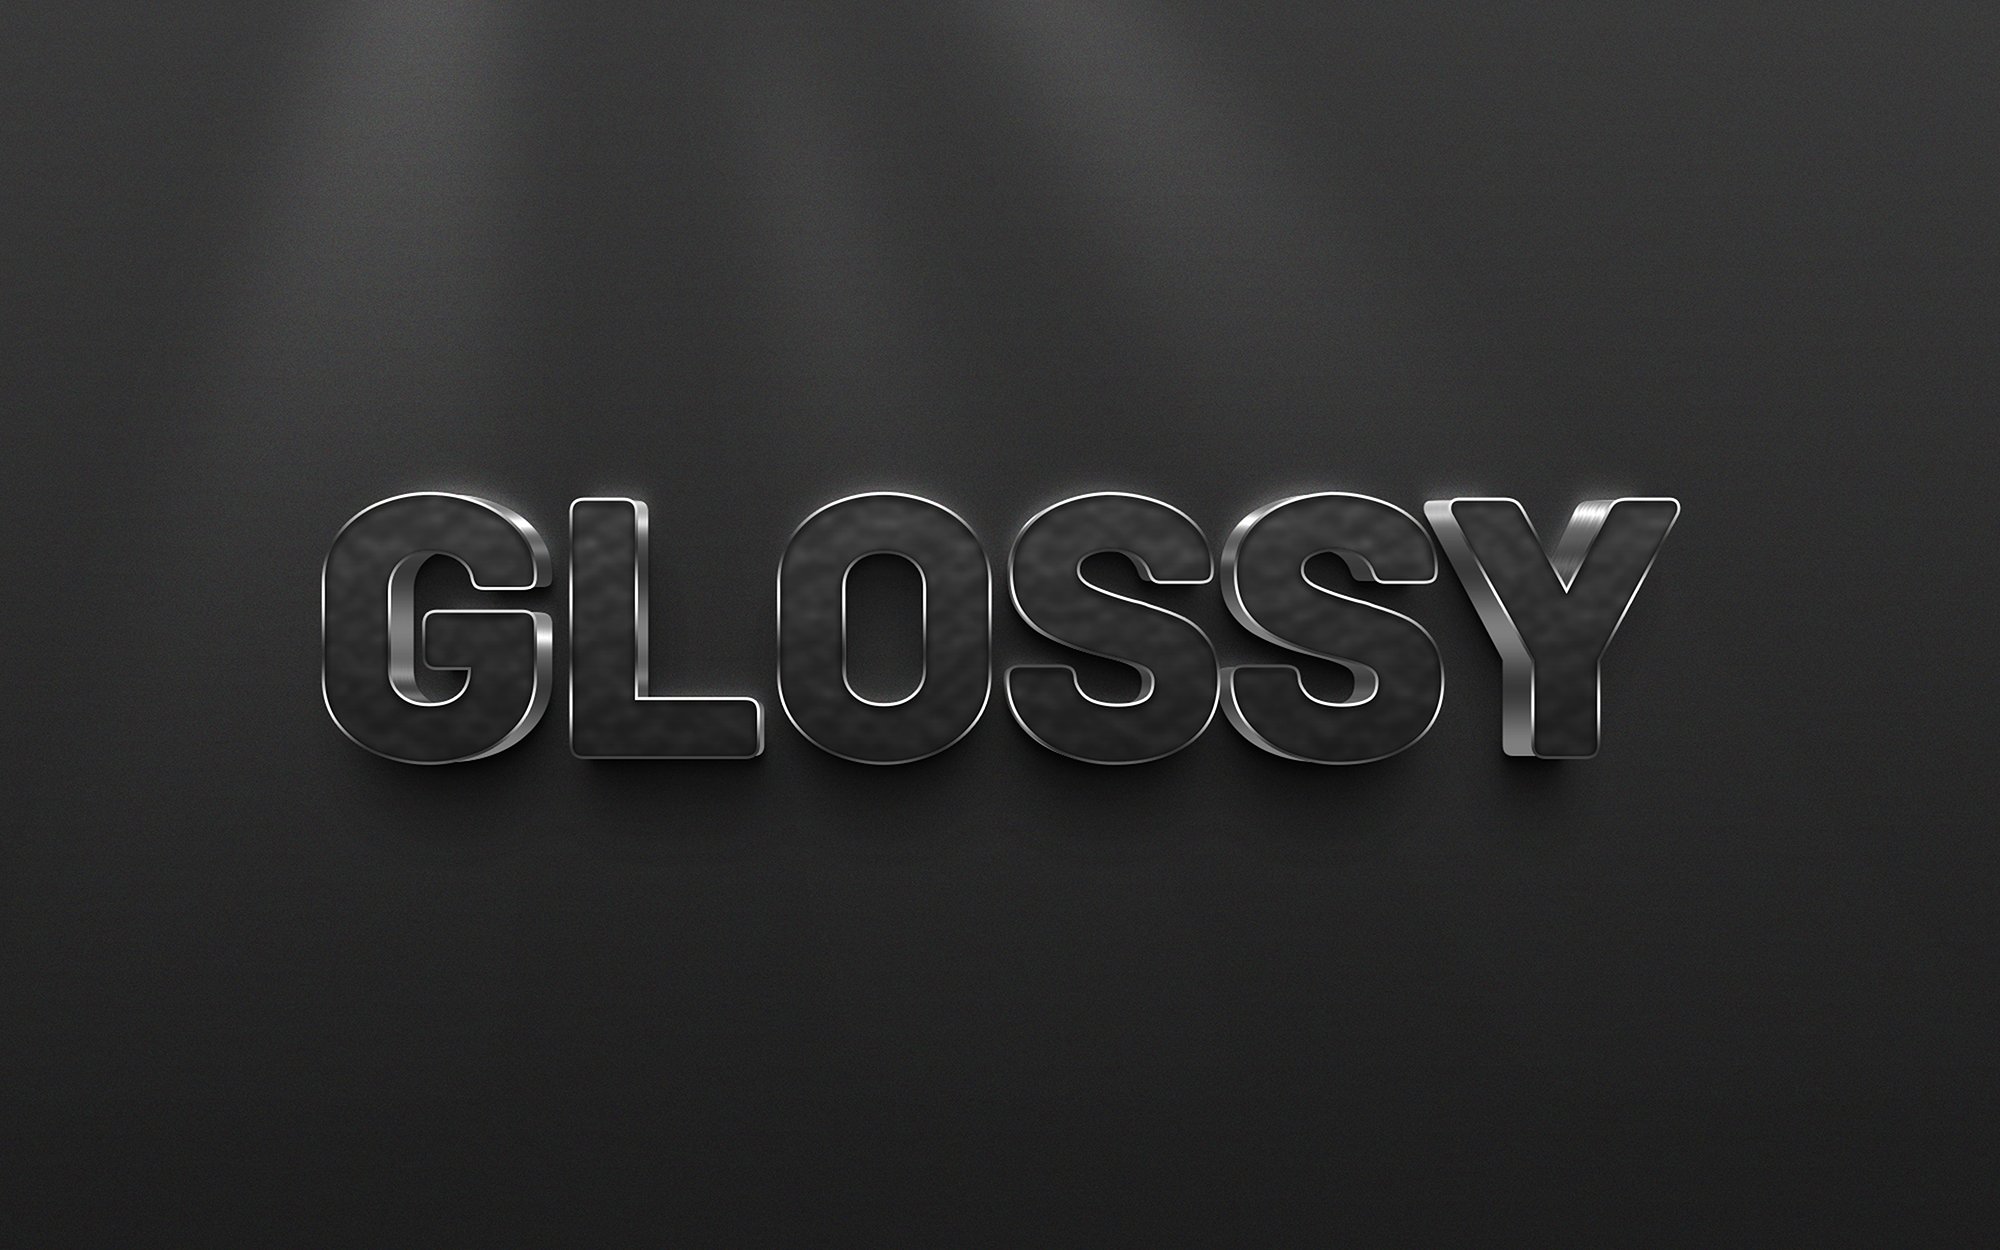 Glossy 3d Editable Text Effect Stylecover image.